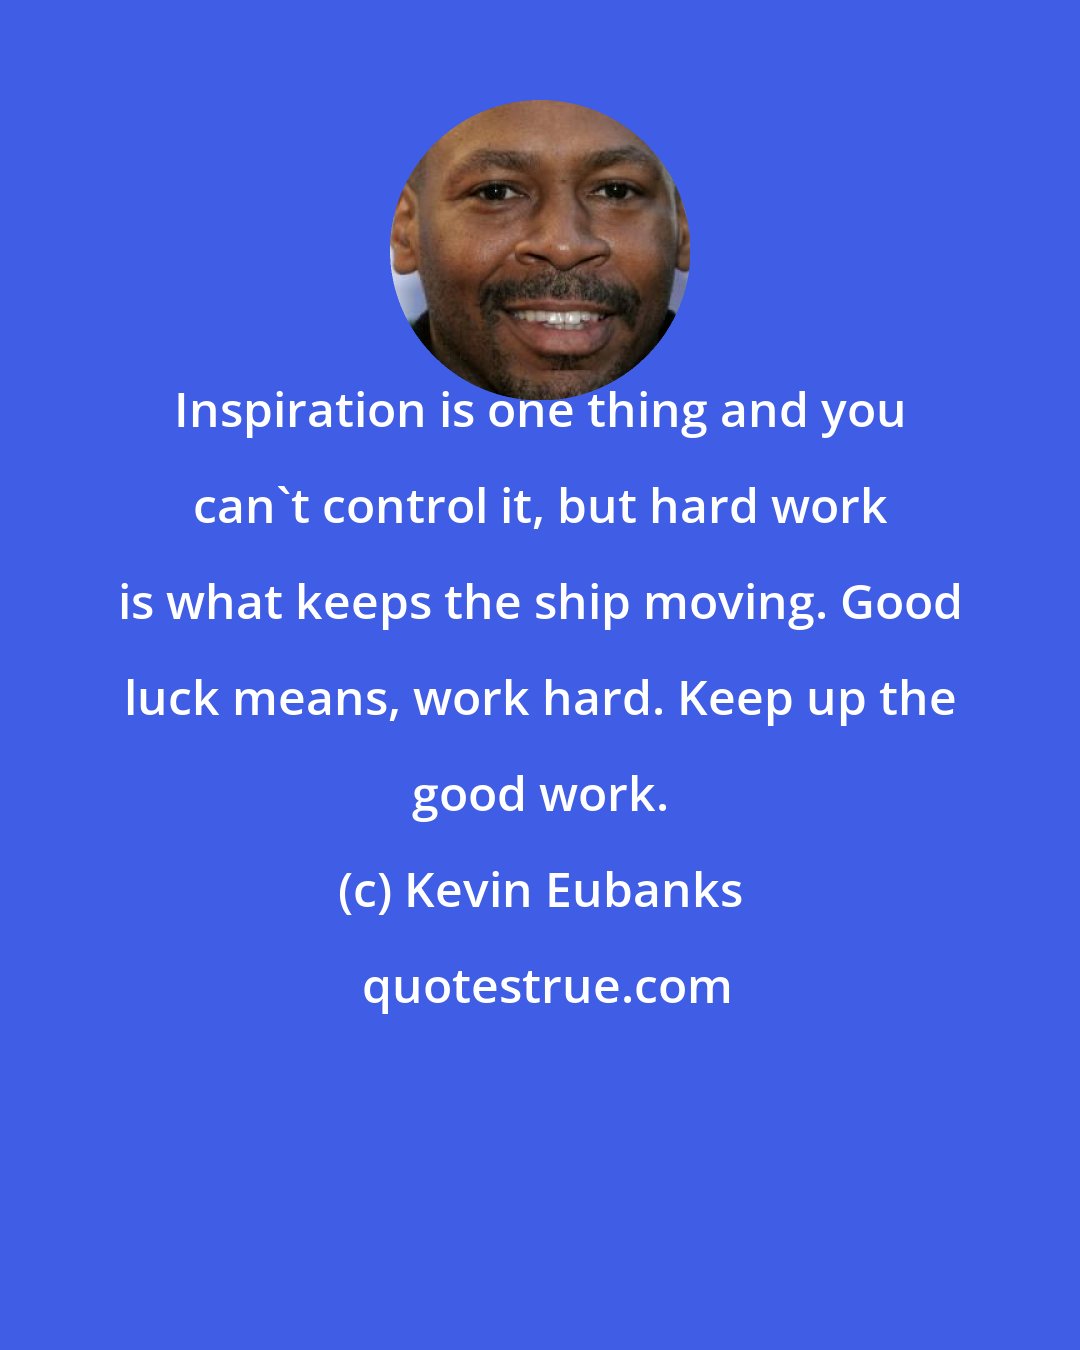 Kevin Eubanks: Inspiration is one thing and you can't control it, but hard work is what keeps the ship moving. Good luck means, work hard. Keep up the good work.